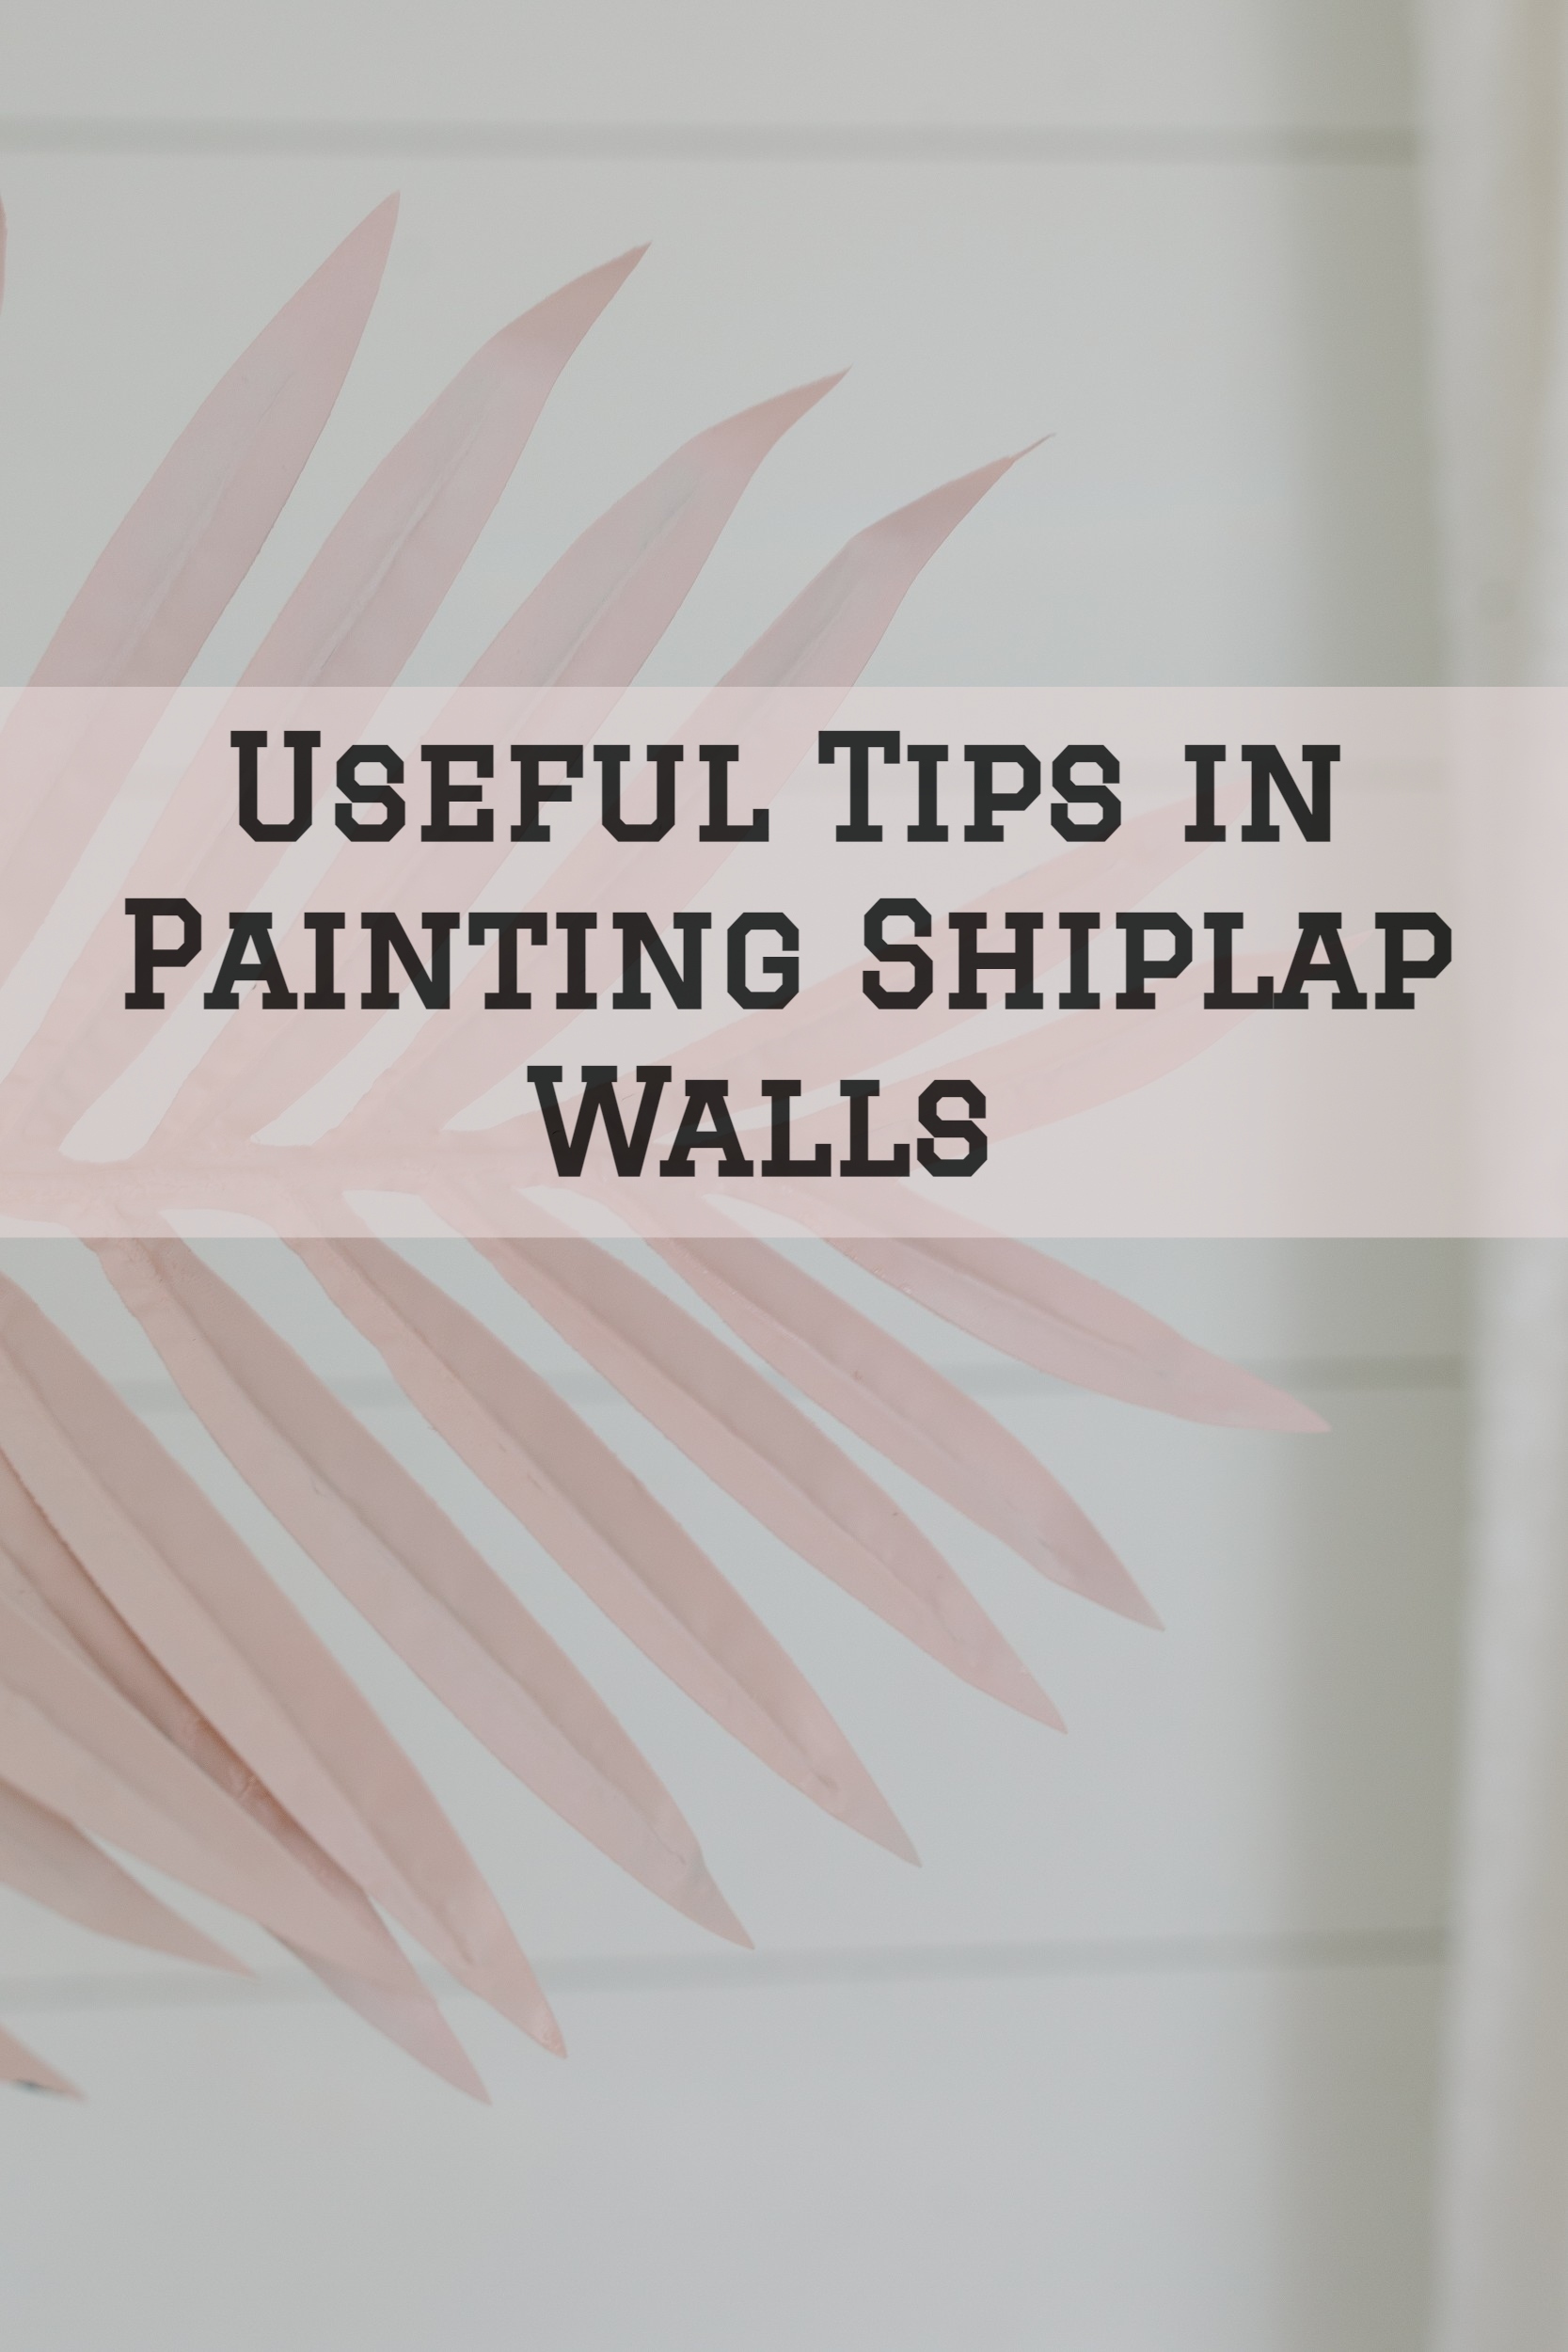 2022-05-11 Left Moon Painting Useful Tips in Painting Shiplap Walls